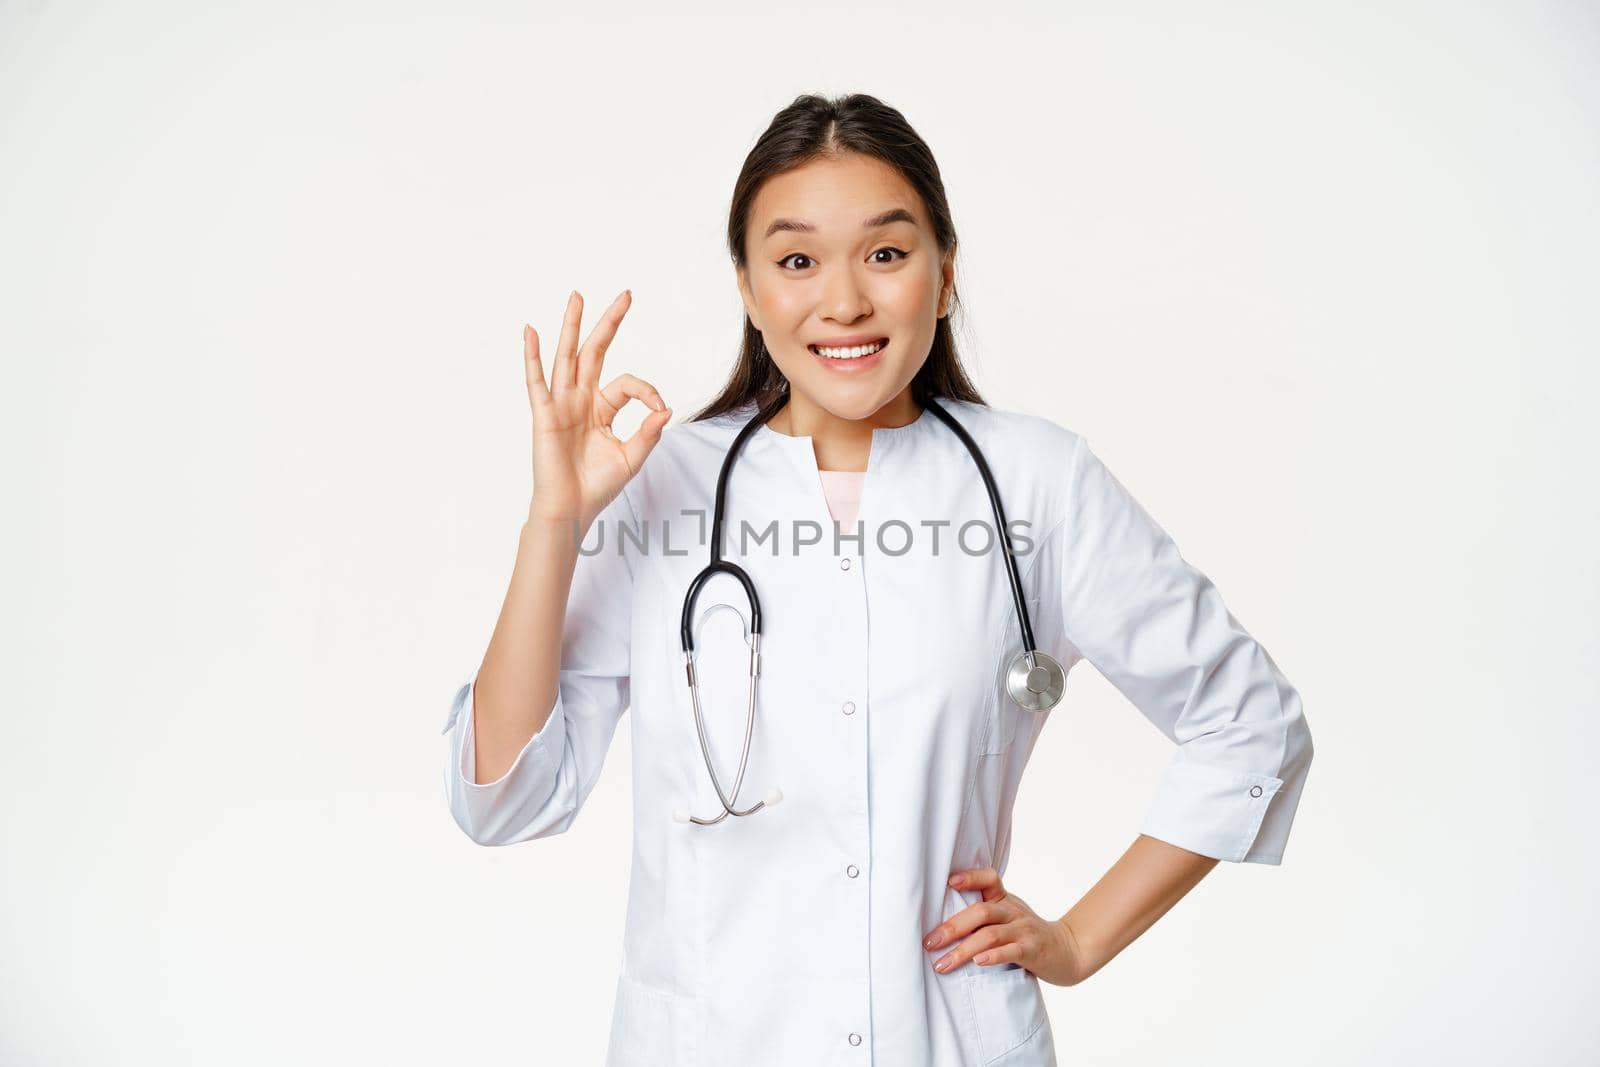 Smiling asian doctor shows okay sign, wears medical robe. Female hospital worker in uniform recommends smth, standing over white background.